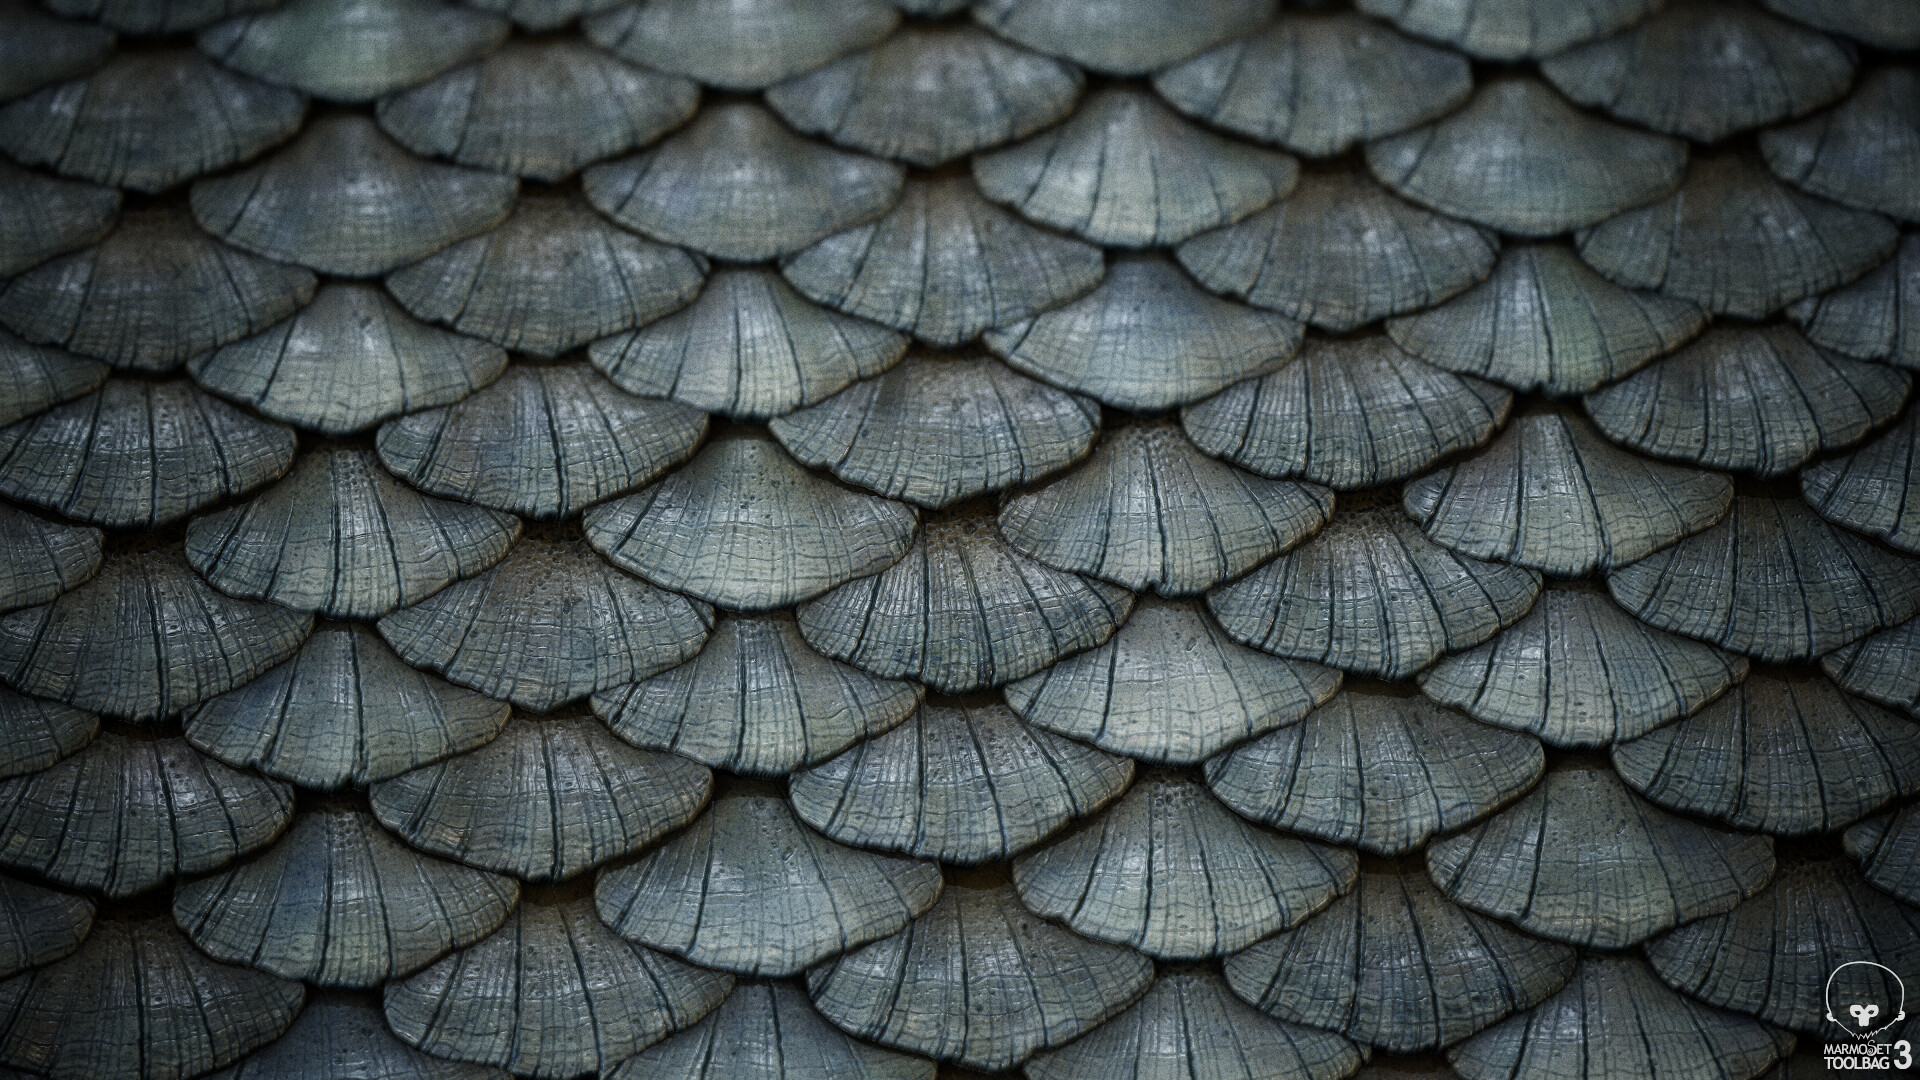 Andrew Wells - Fish scales (procedural material)